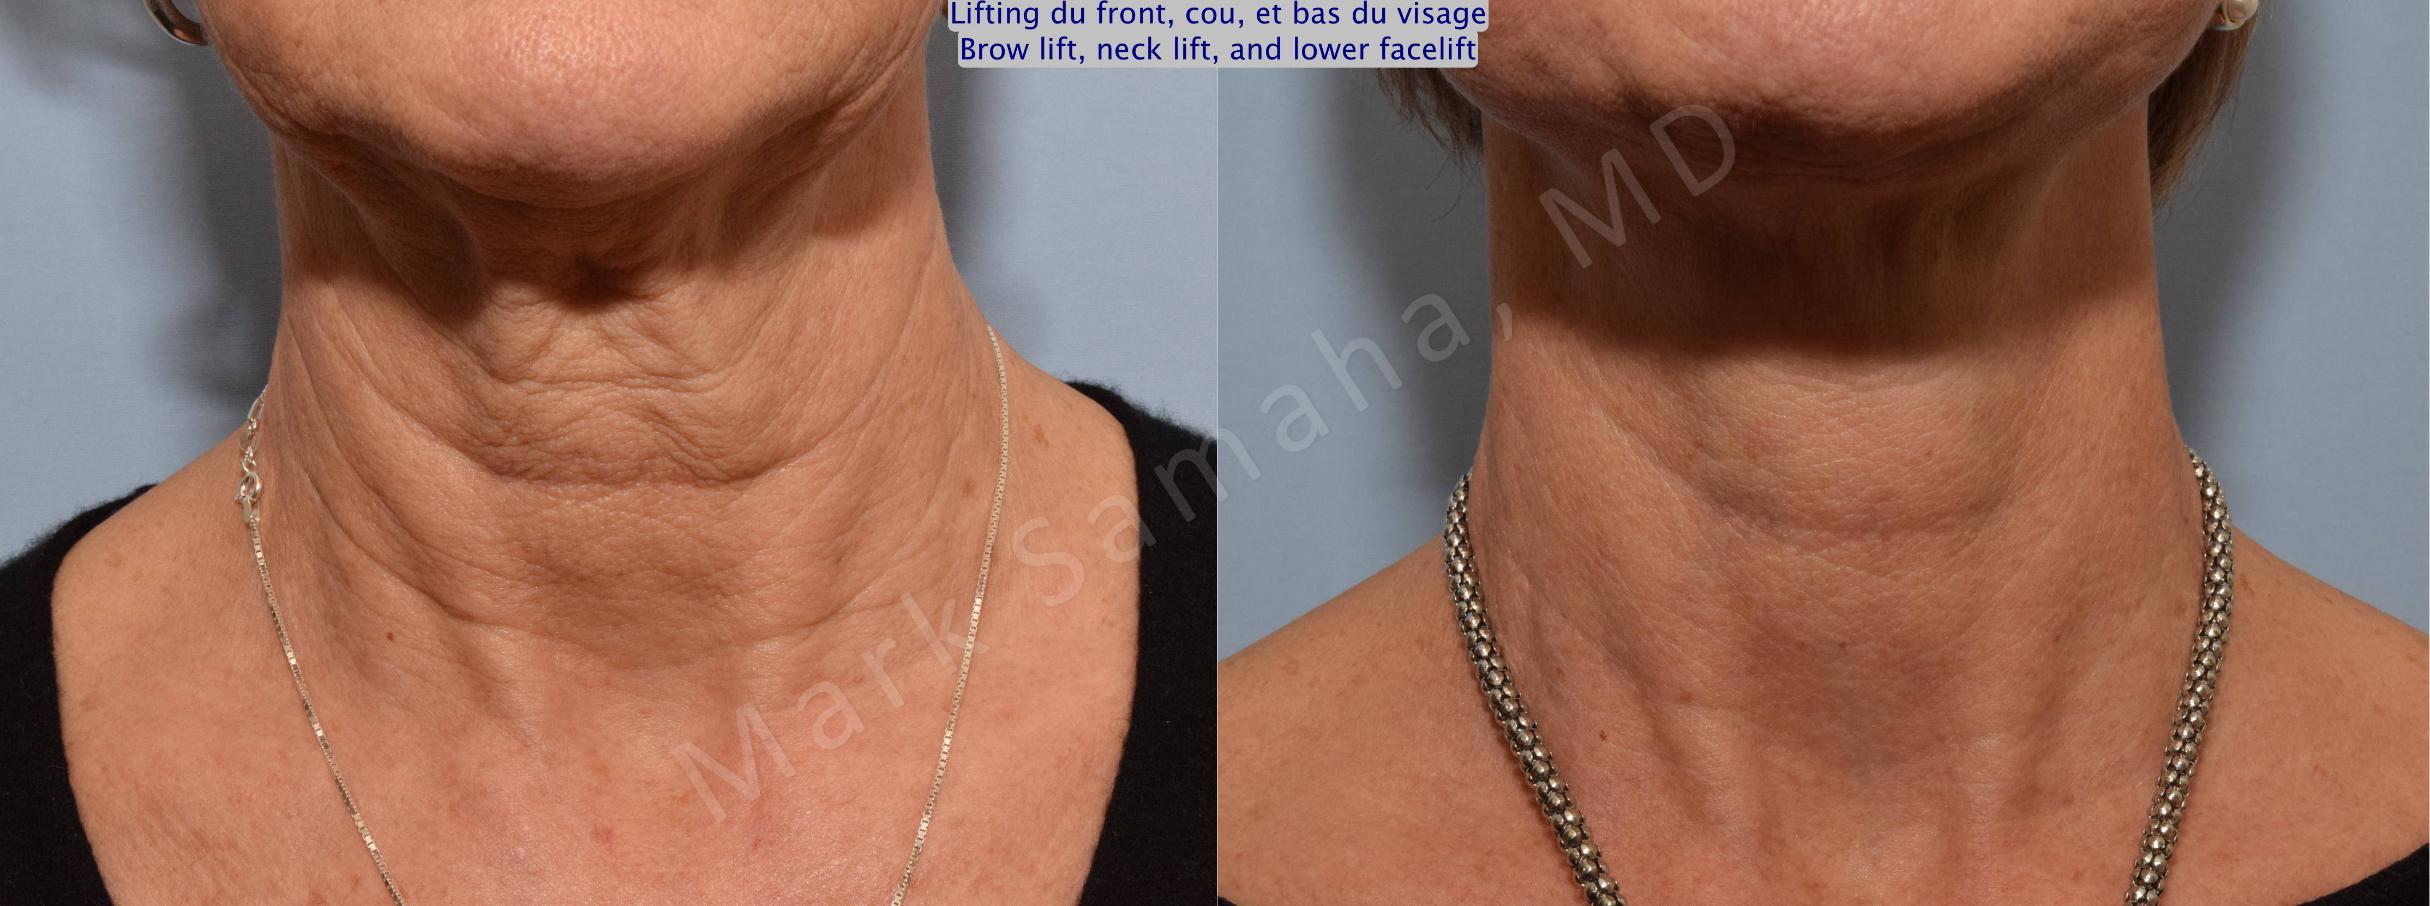 Before & After Facelift / Necklift - Lifting du visage / Cou Case 92 View #2 View in Mount Royal, QC